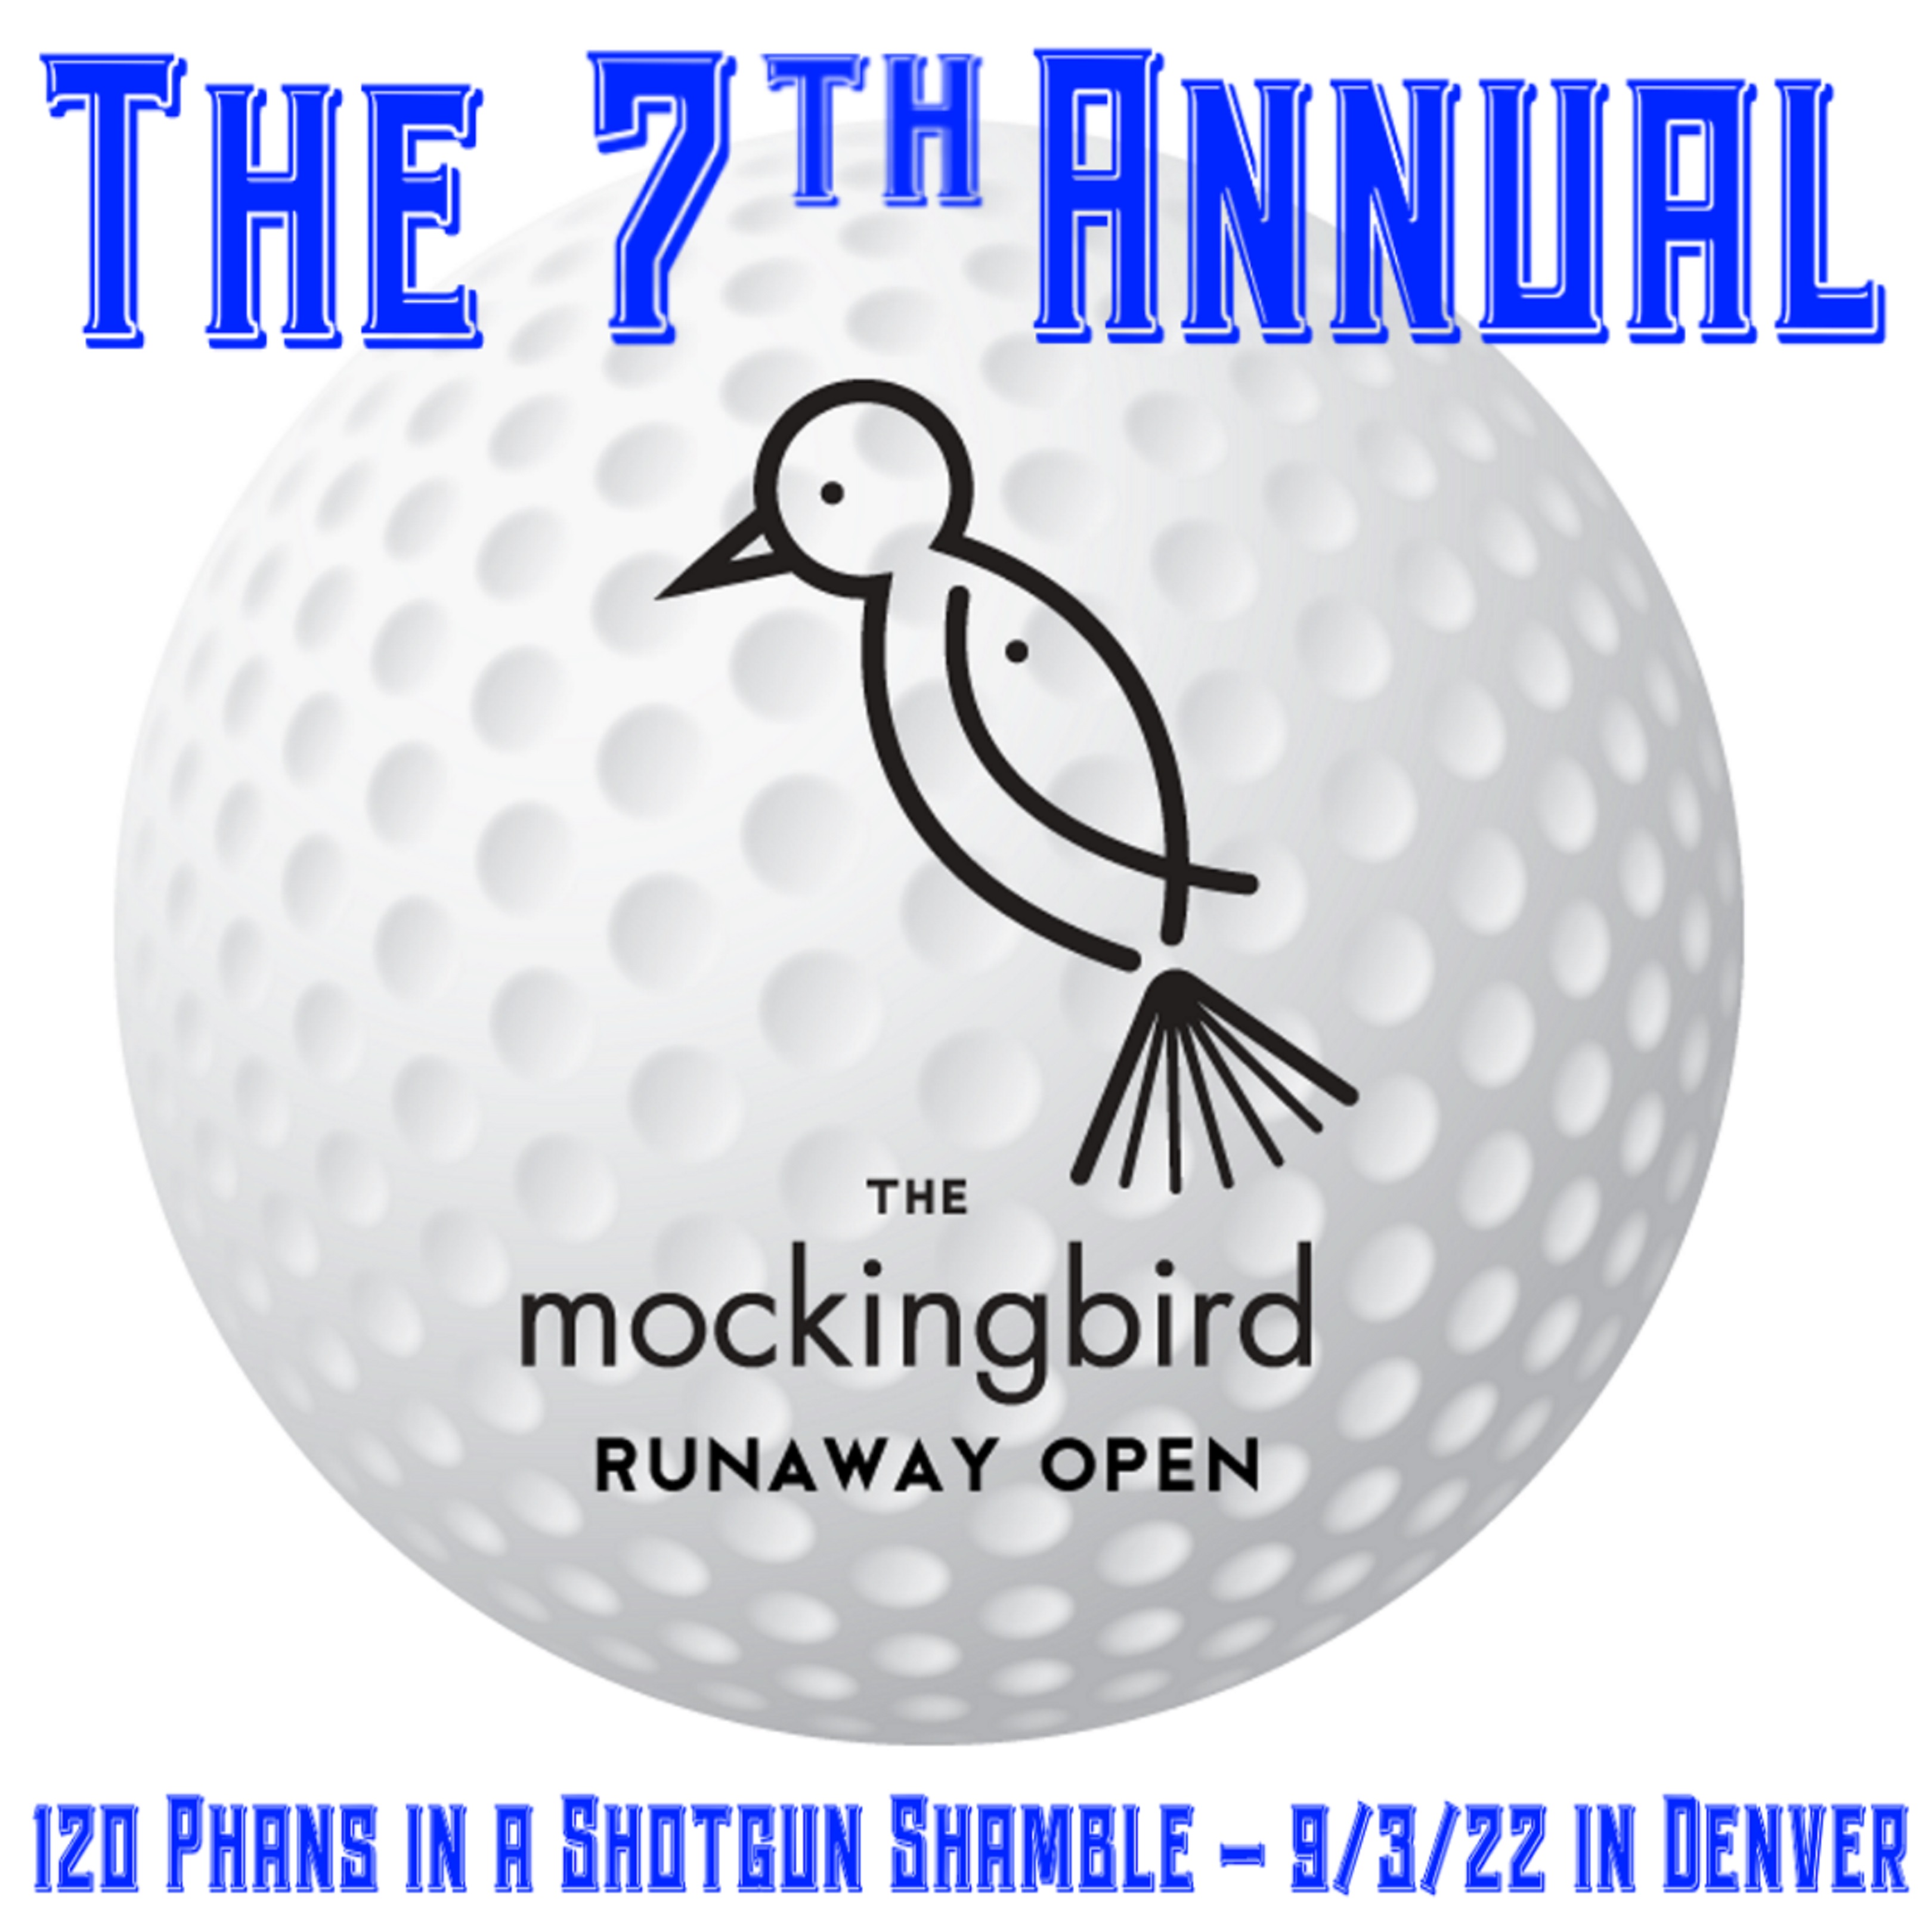 Seventh Annual Runaway Open charity golf tournament for Phish fans